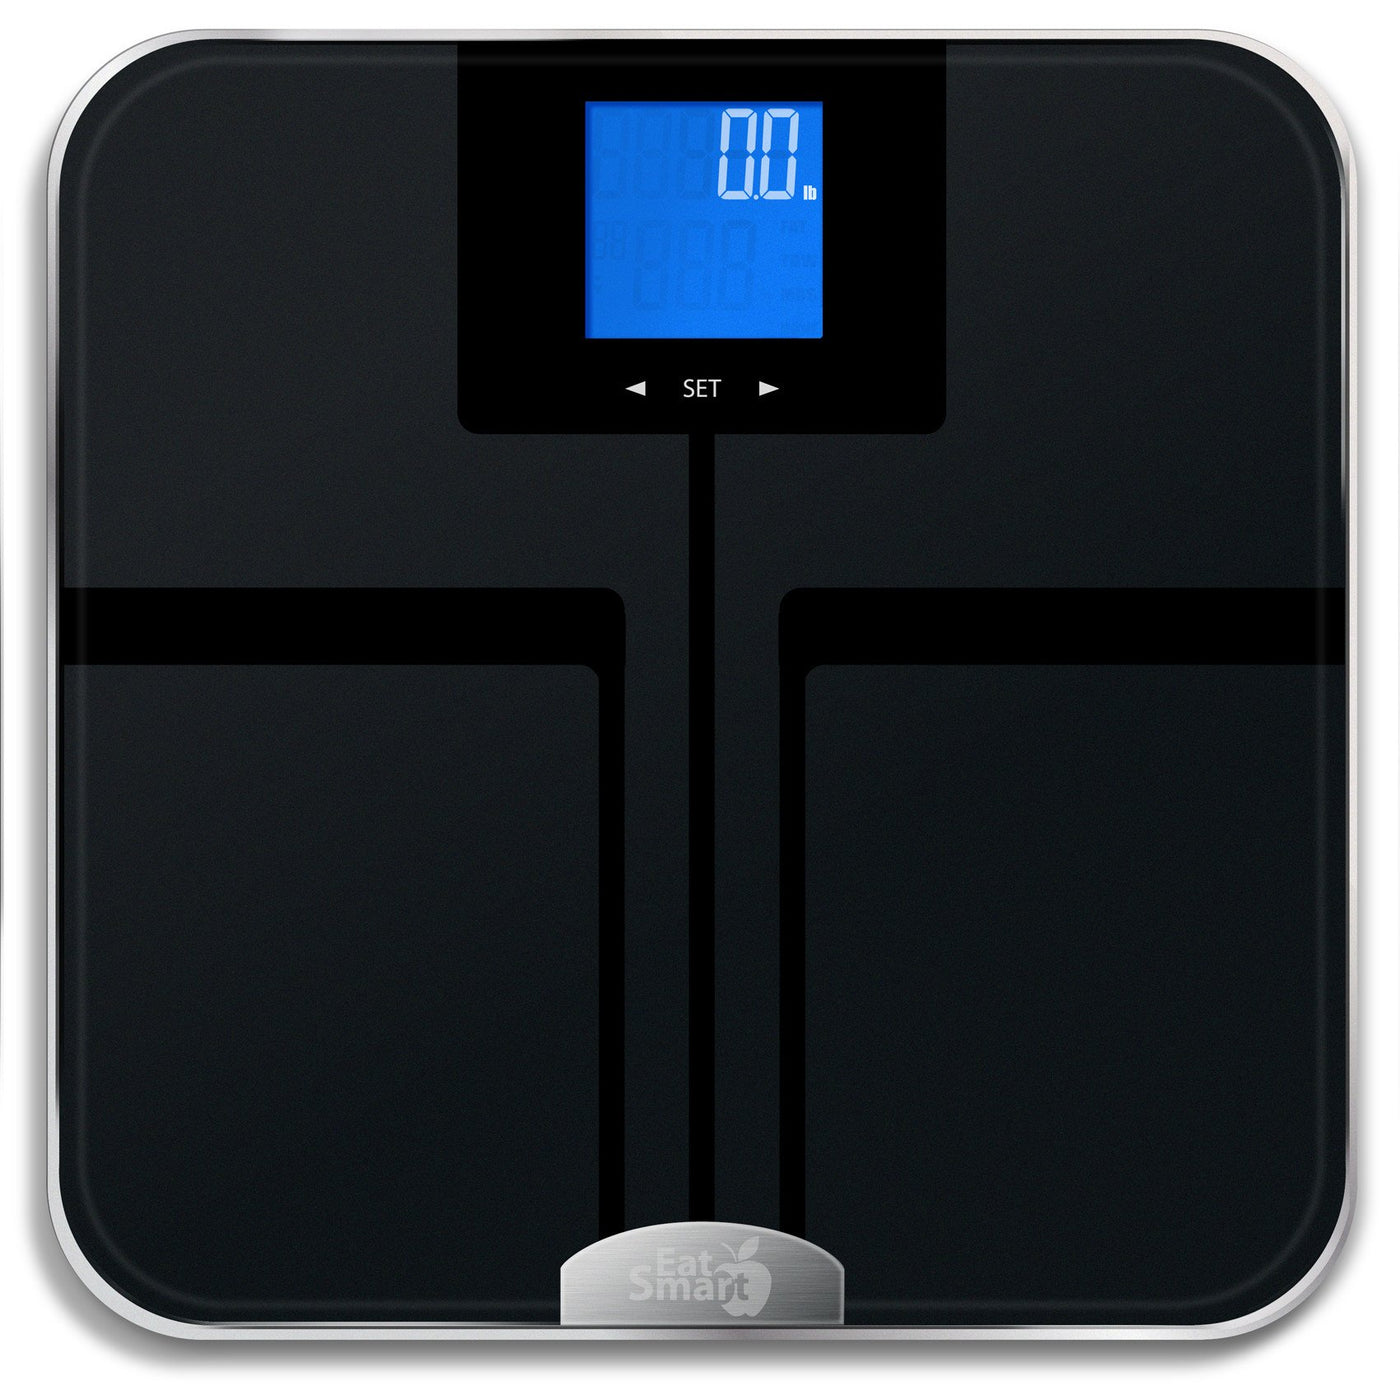 EatSmart Products Body Fat Scale Helps Monitor Body Fat Instead of BMI